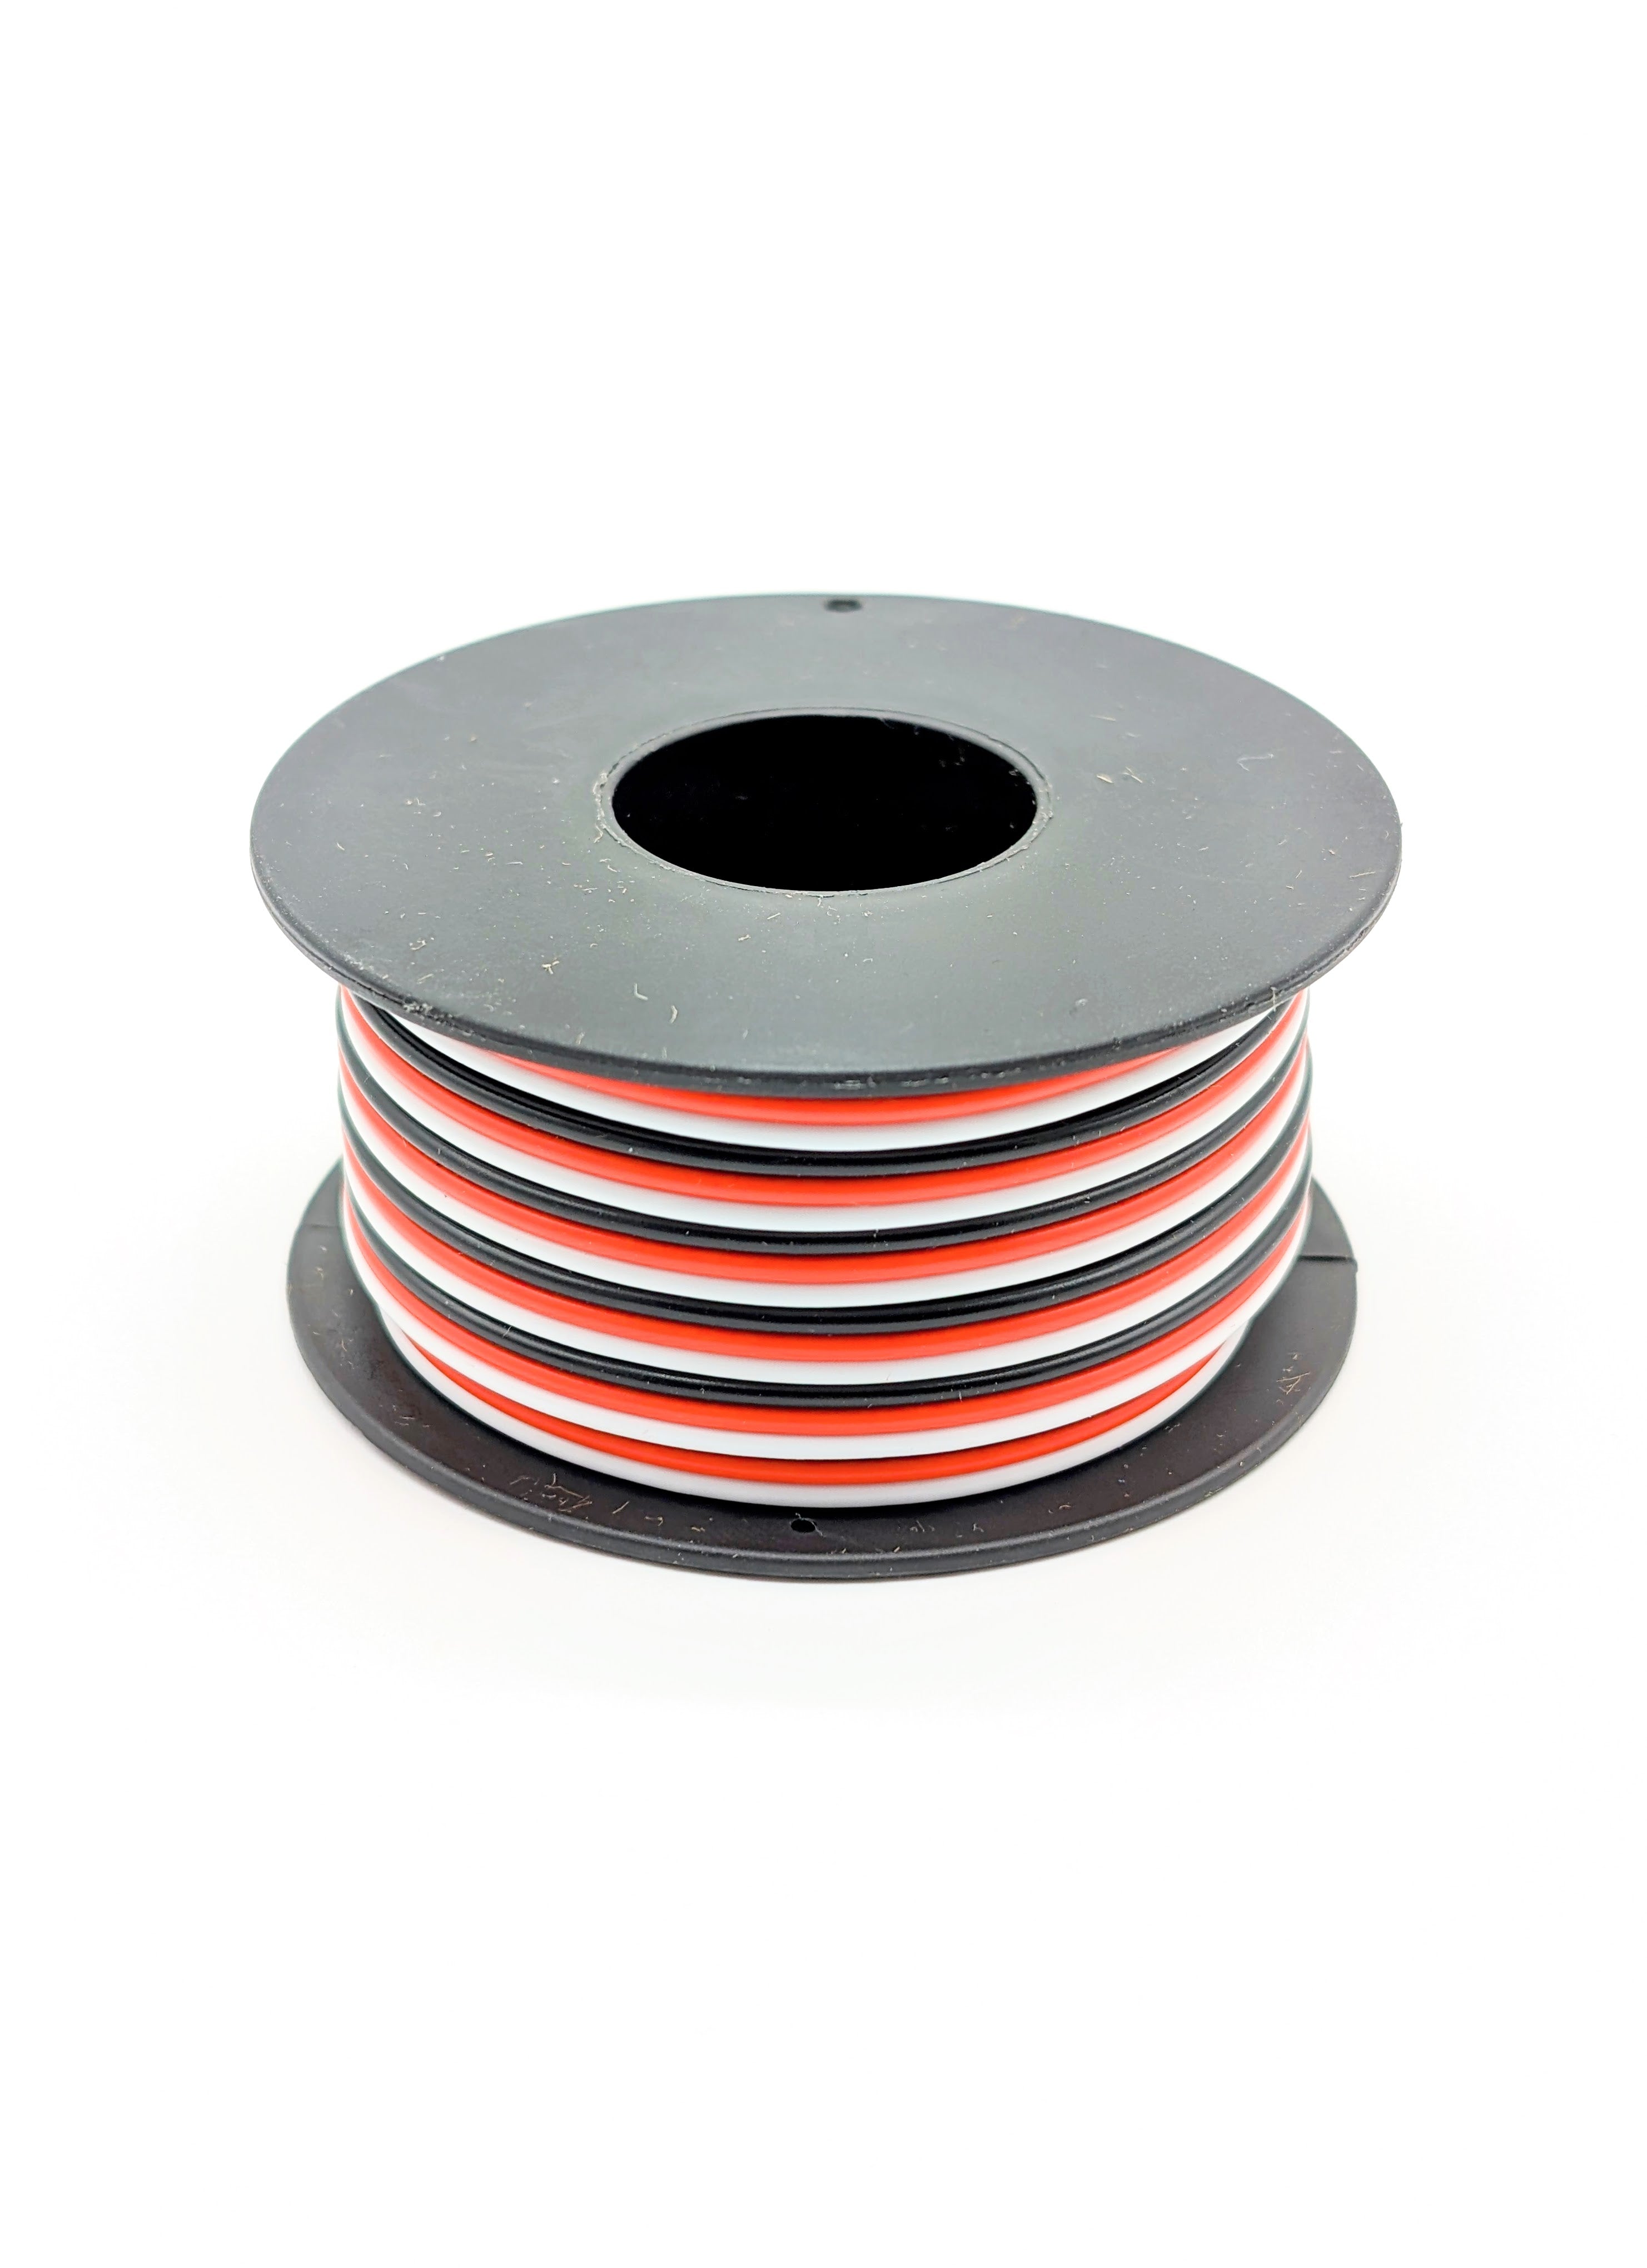 25 Feet - Bonded 22 AWG Flexible Silicone Jacketed Wire